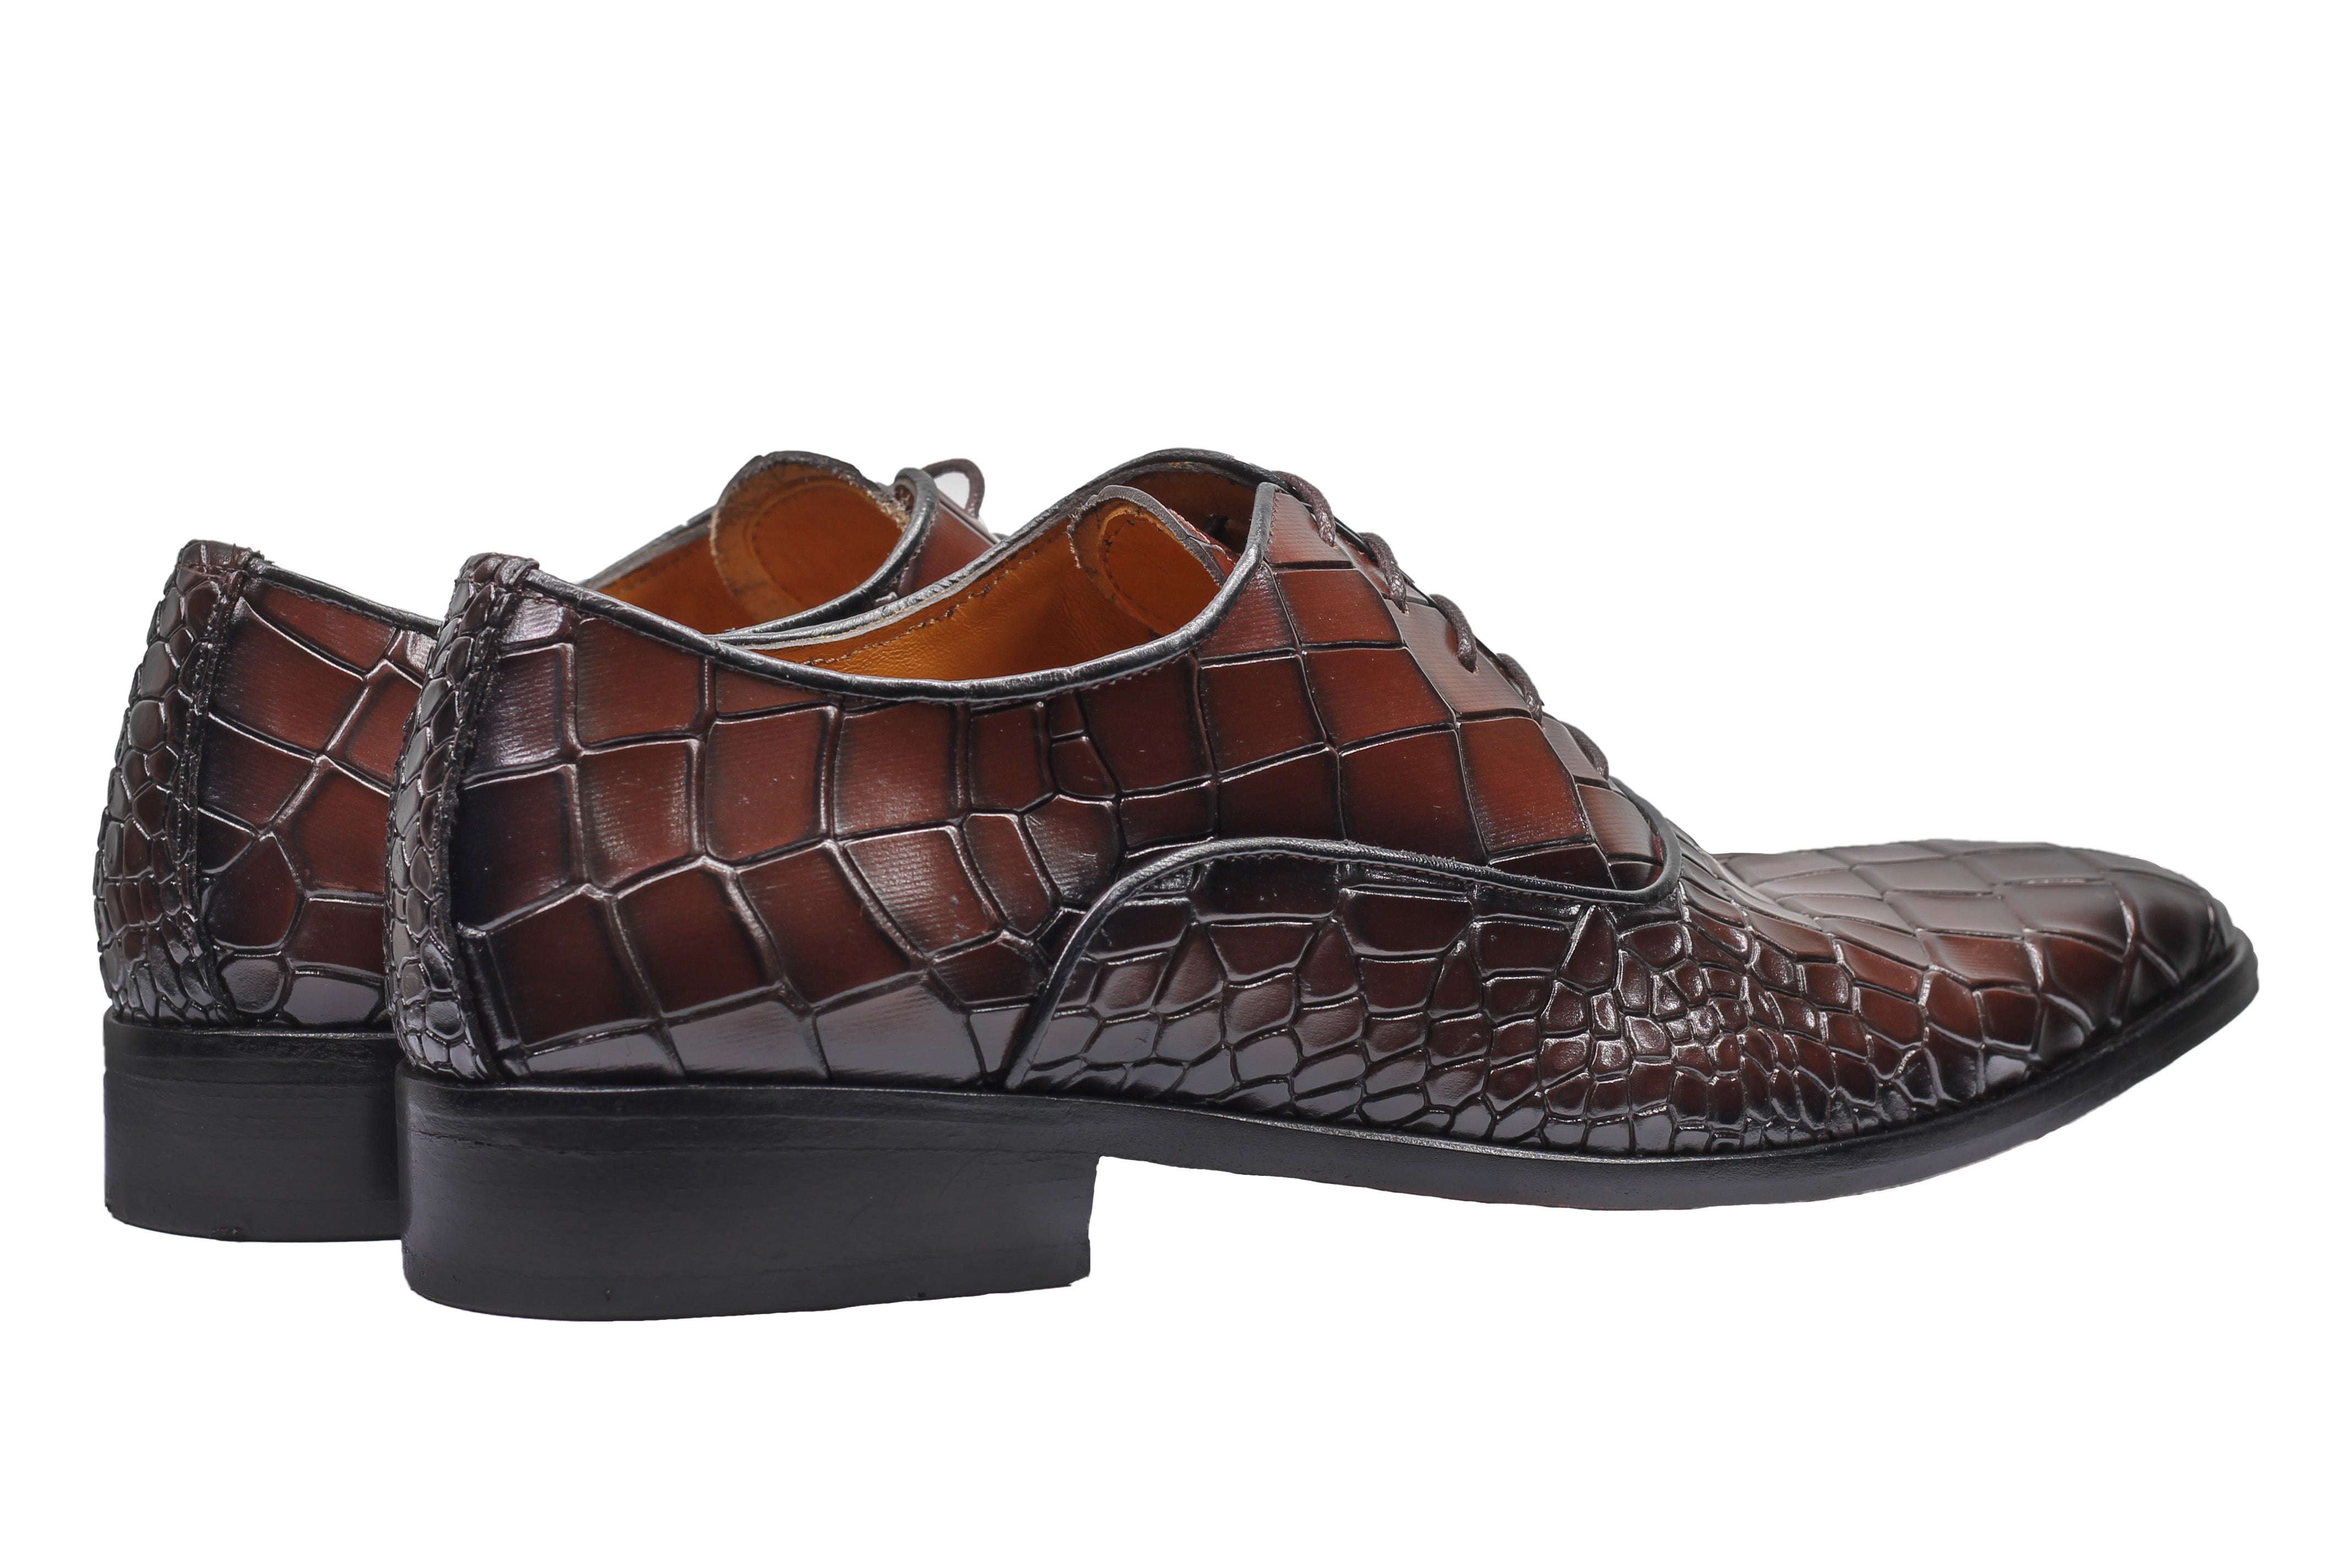 BROWN– CROCO PRINTED LEATHER OXFORDS